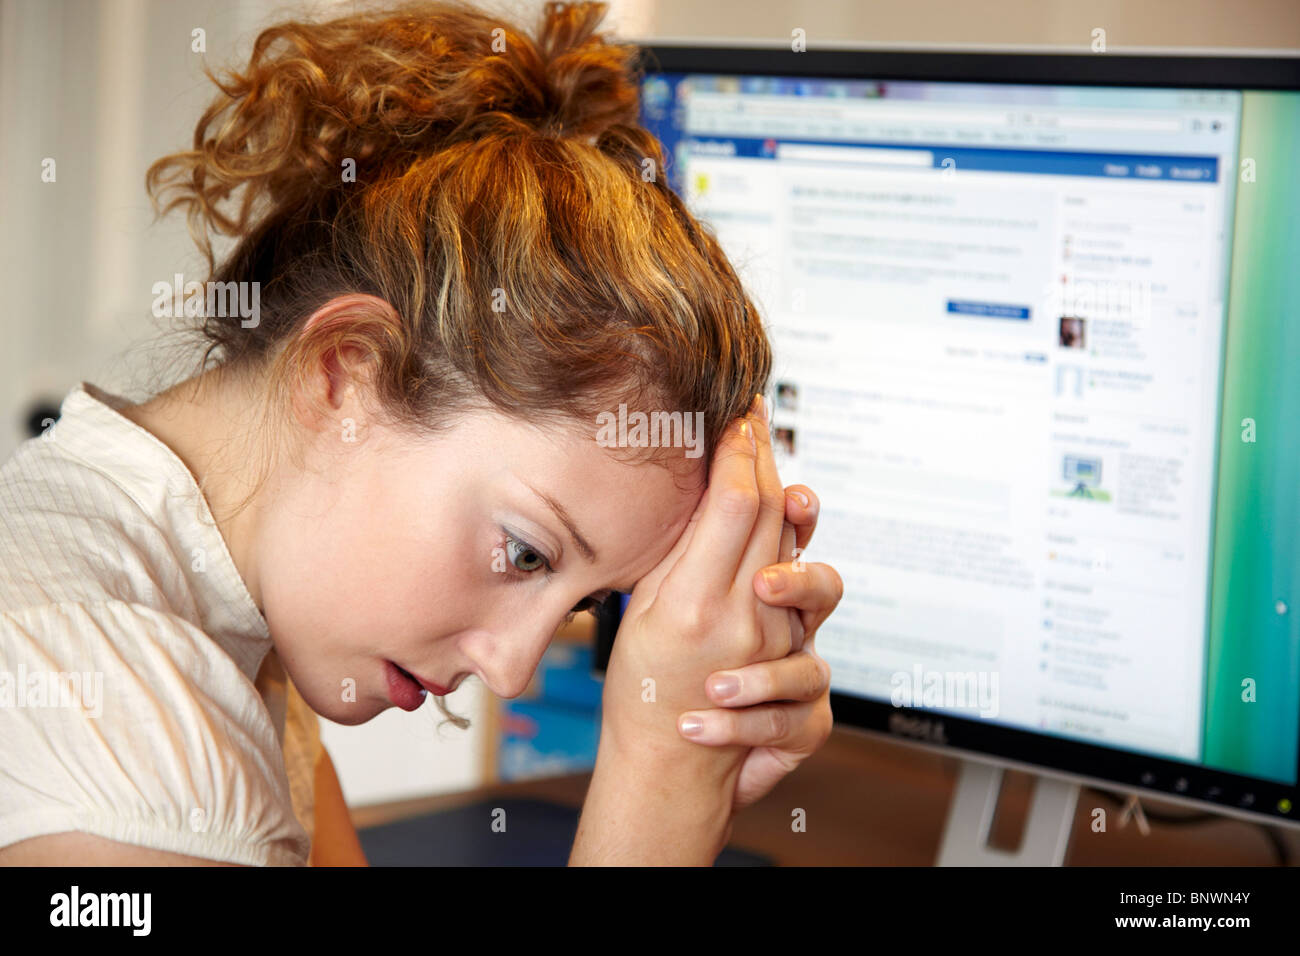 Girl looking upset at online chat line Stock Photo